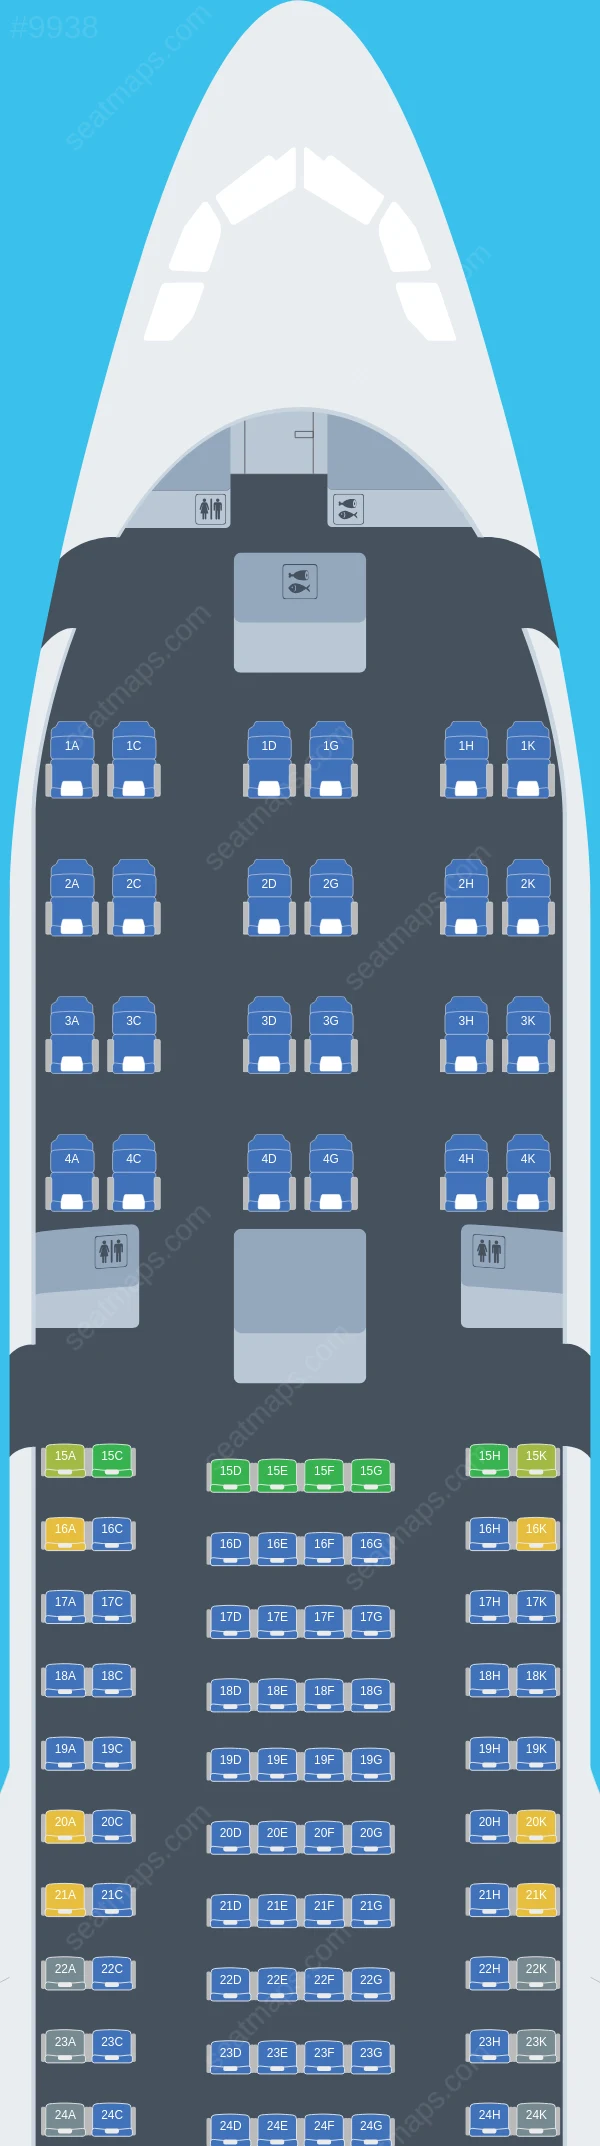 flyCAA Airbus A330-200 seatmap preview